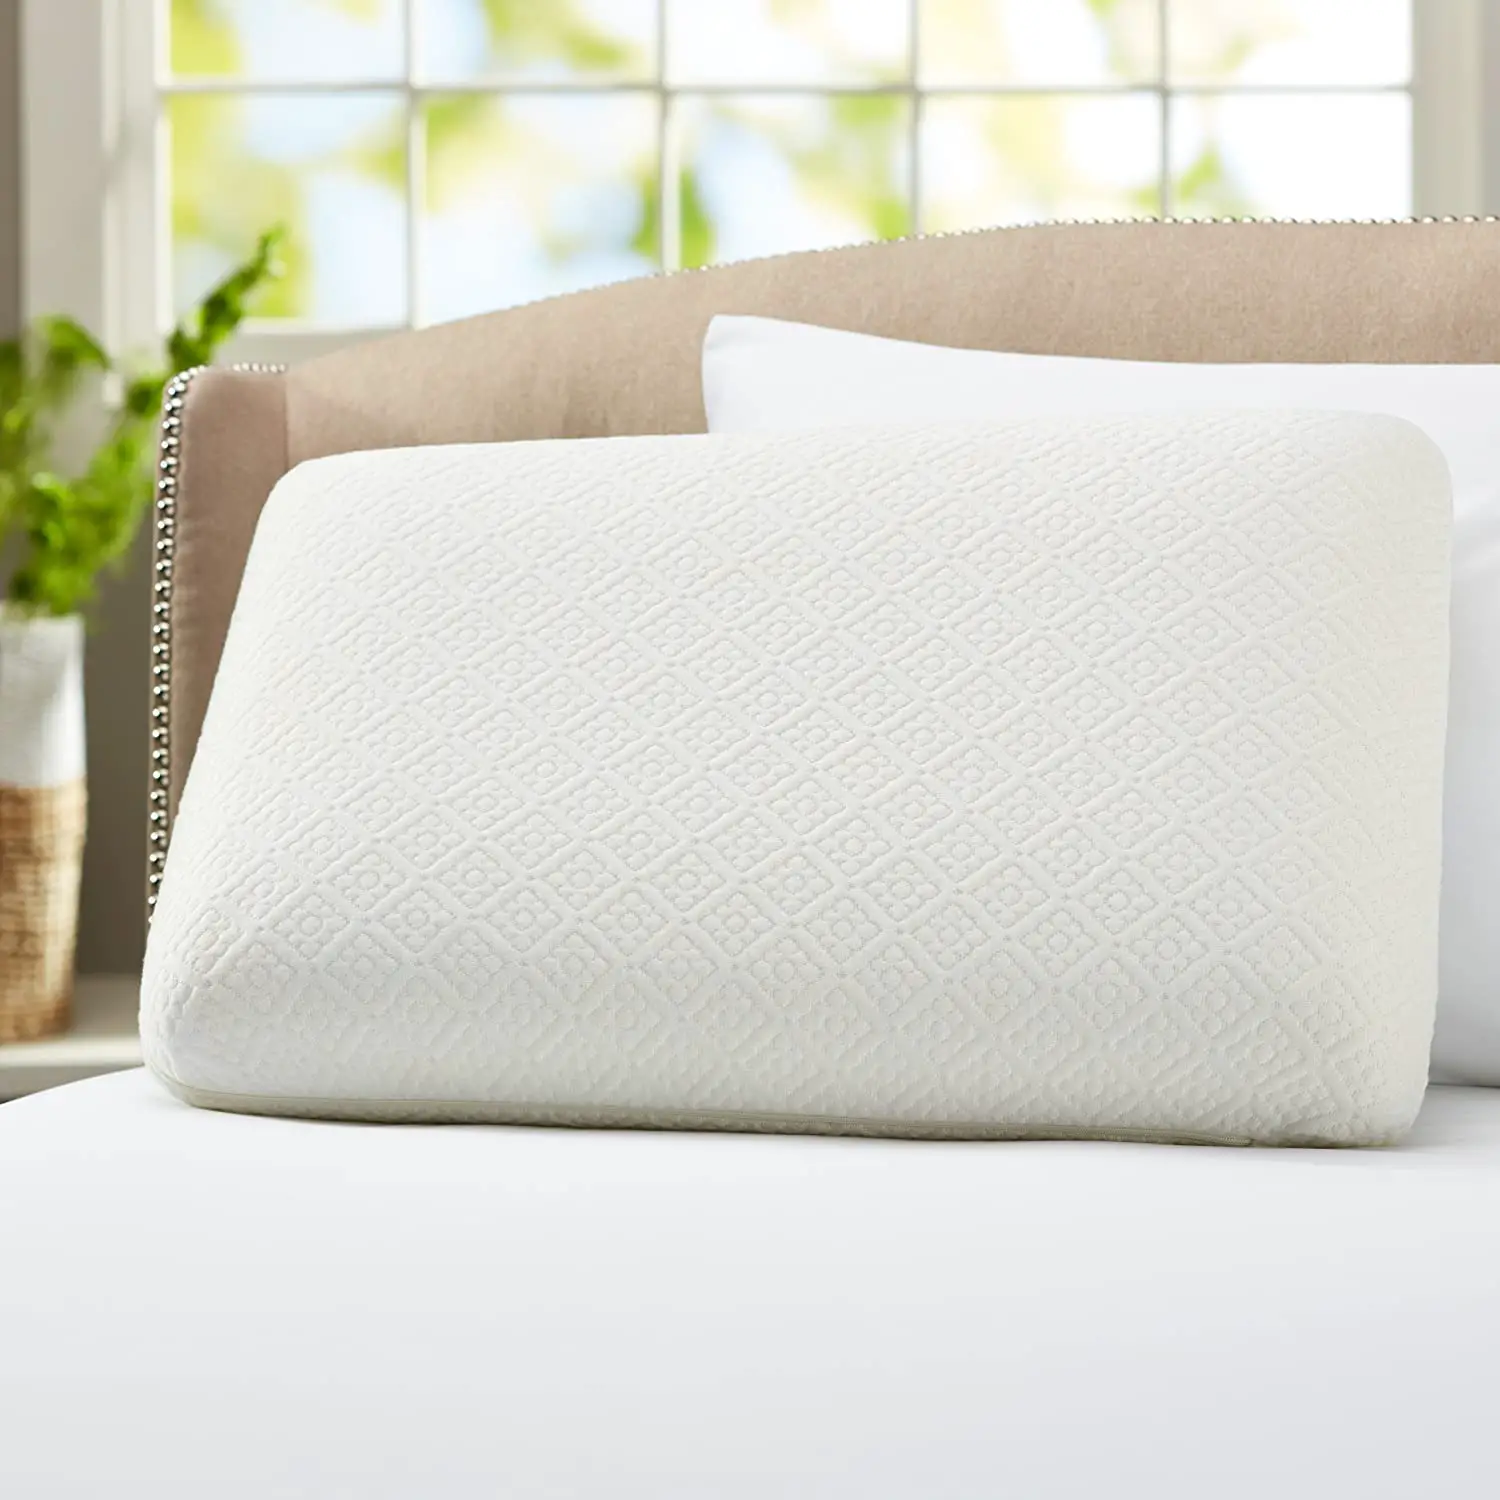 Whats the Absolute BEST Memory Foam Pillow Overall?